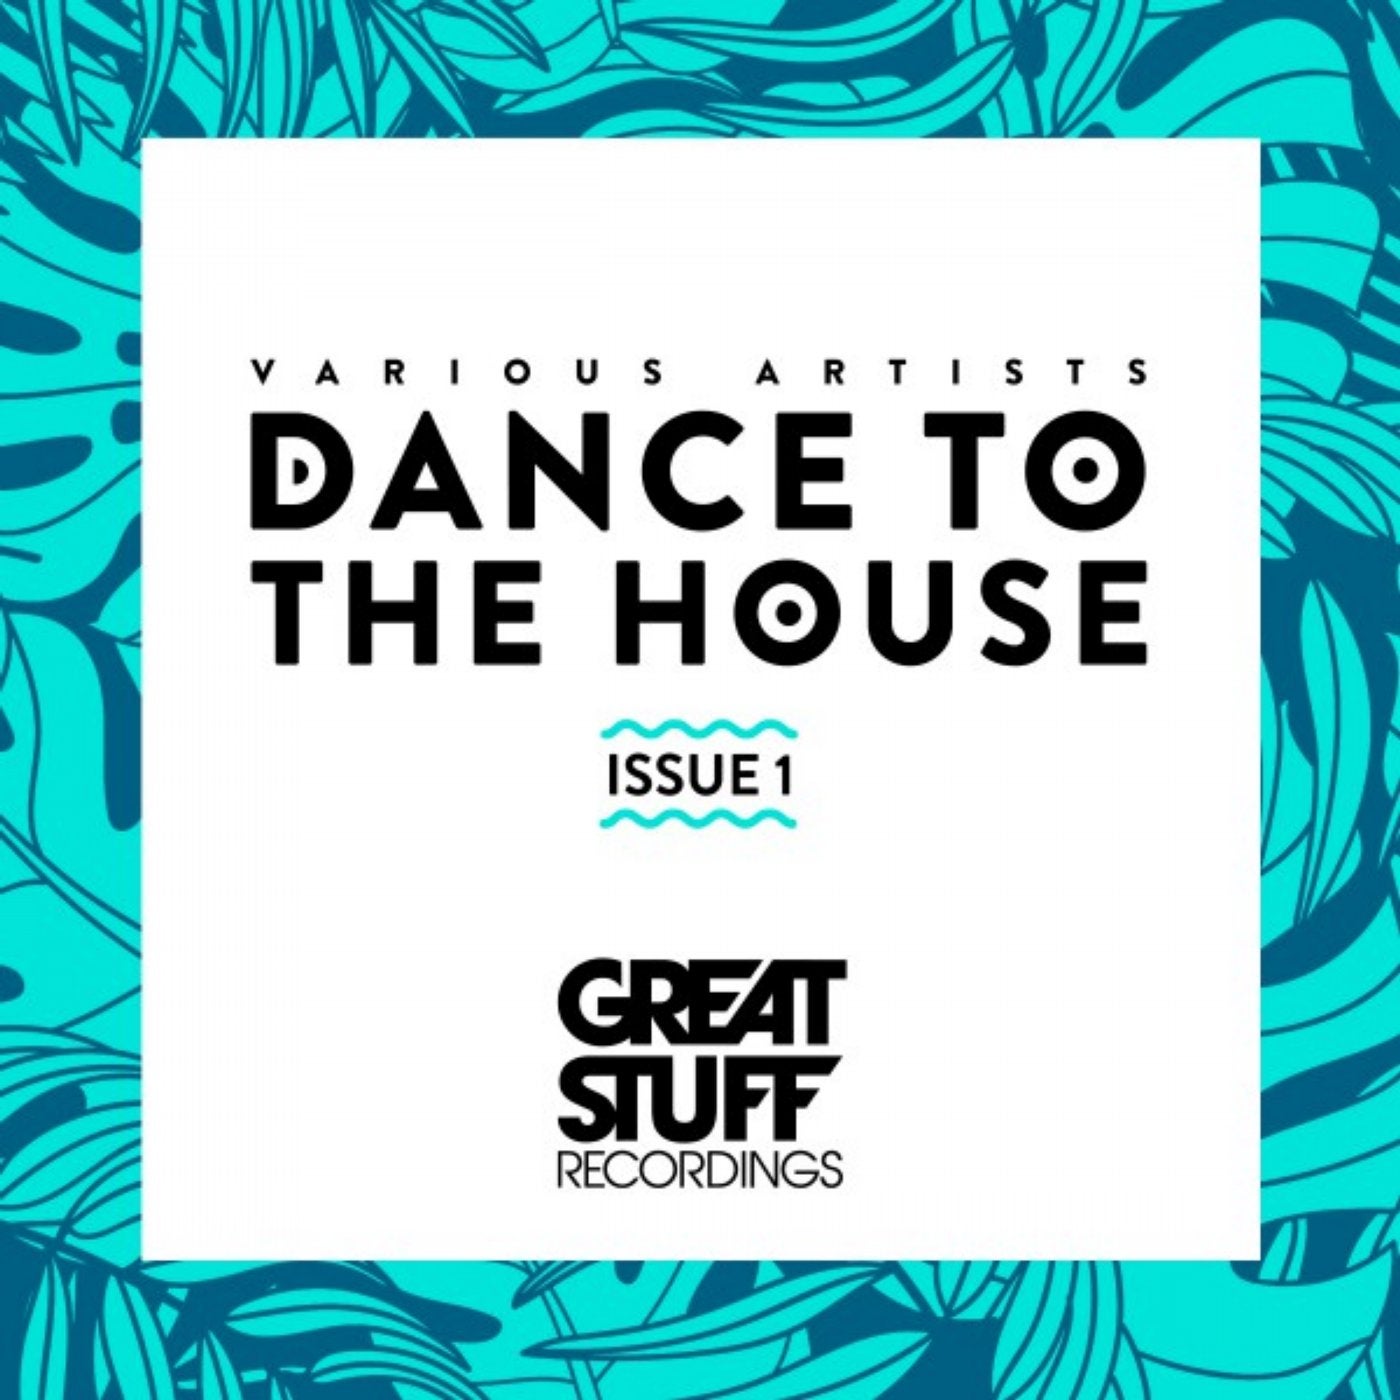 Dance to the House Issue 1